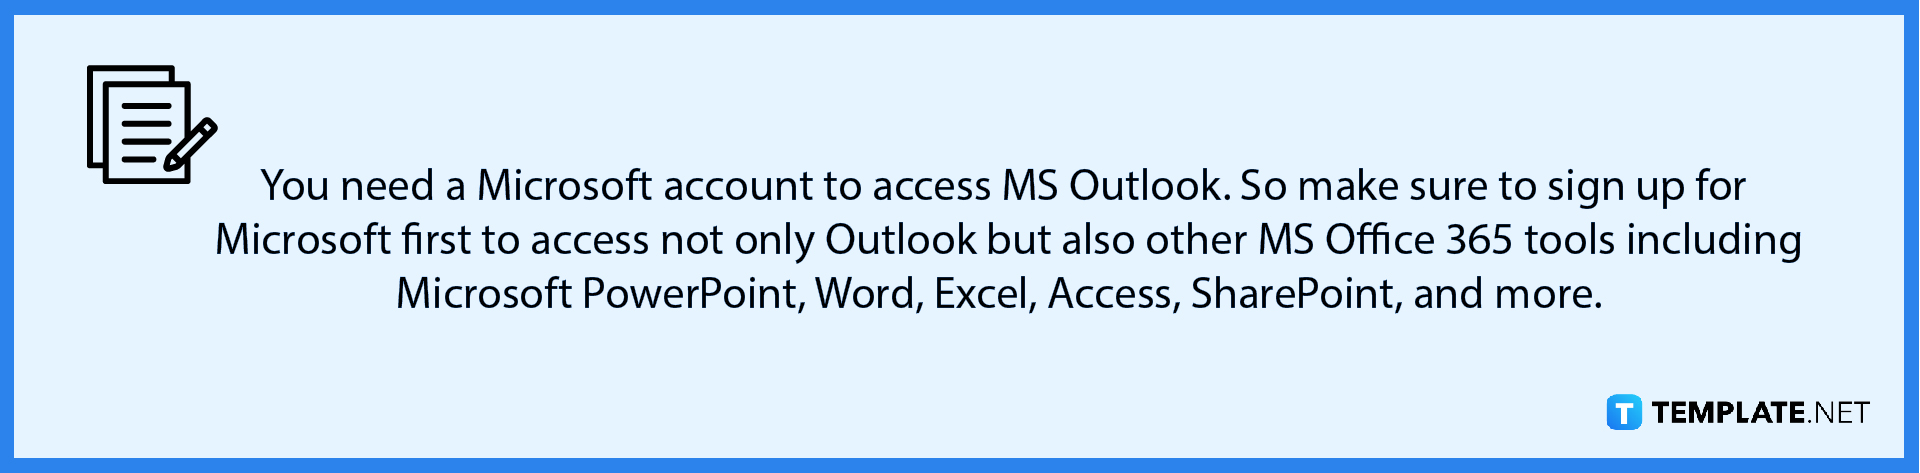 how-to-convert-microsoft-outlook-to-pdf-note-1